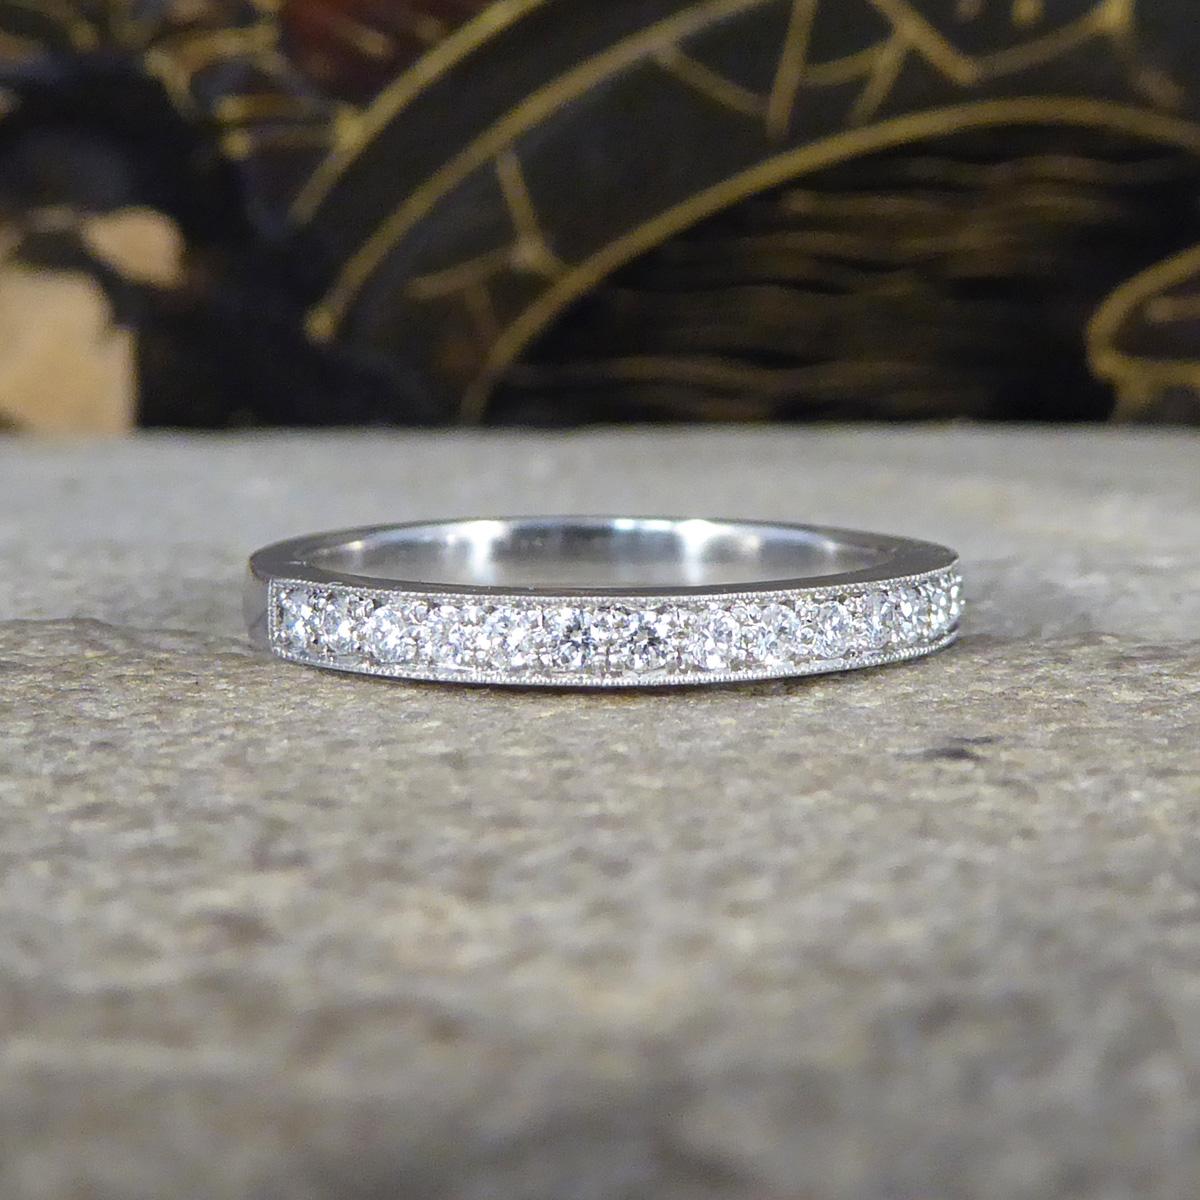 The perfect ring for anyone who likes a little sparkle on the finger, it can be worn independently, as a wedding or eternity band. This quality half eternity ring features 16 very clean and bright Brilliant Cut Diamonds weighing a total of 0.19ct it